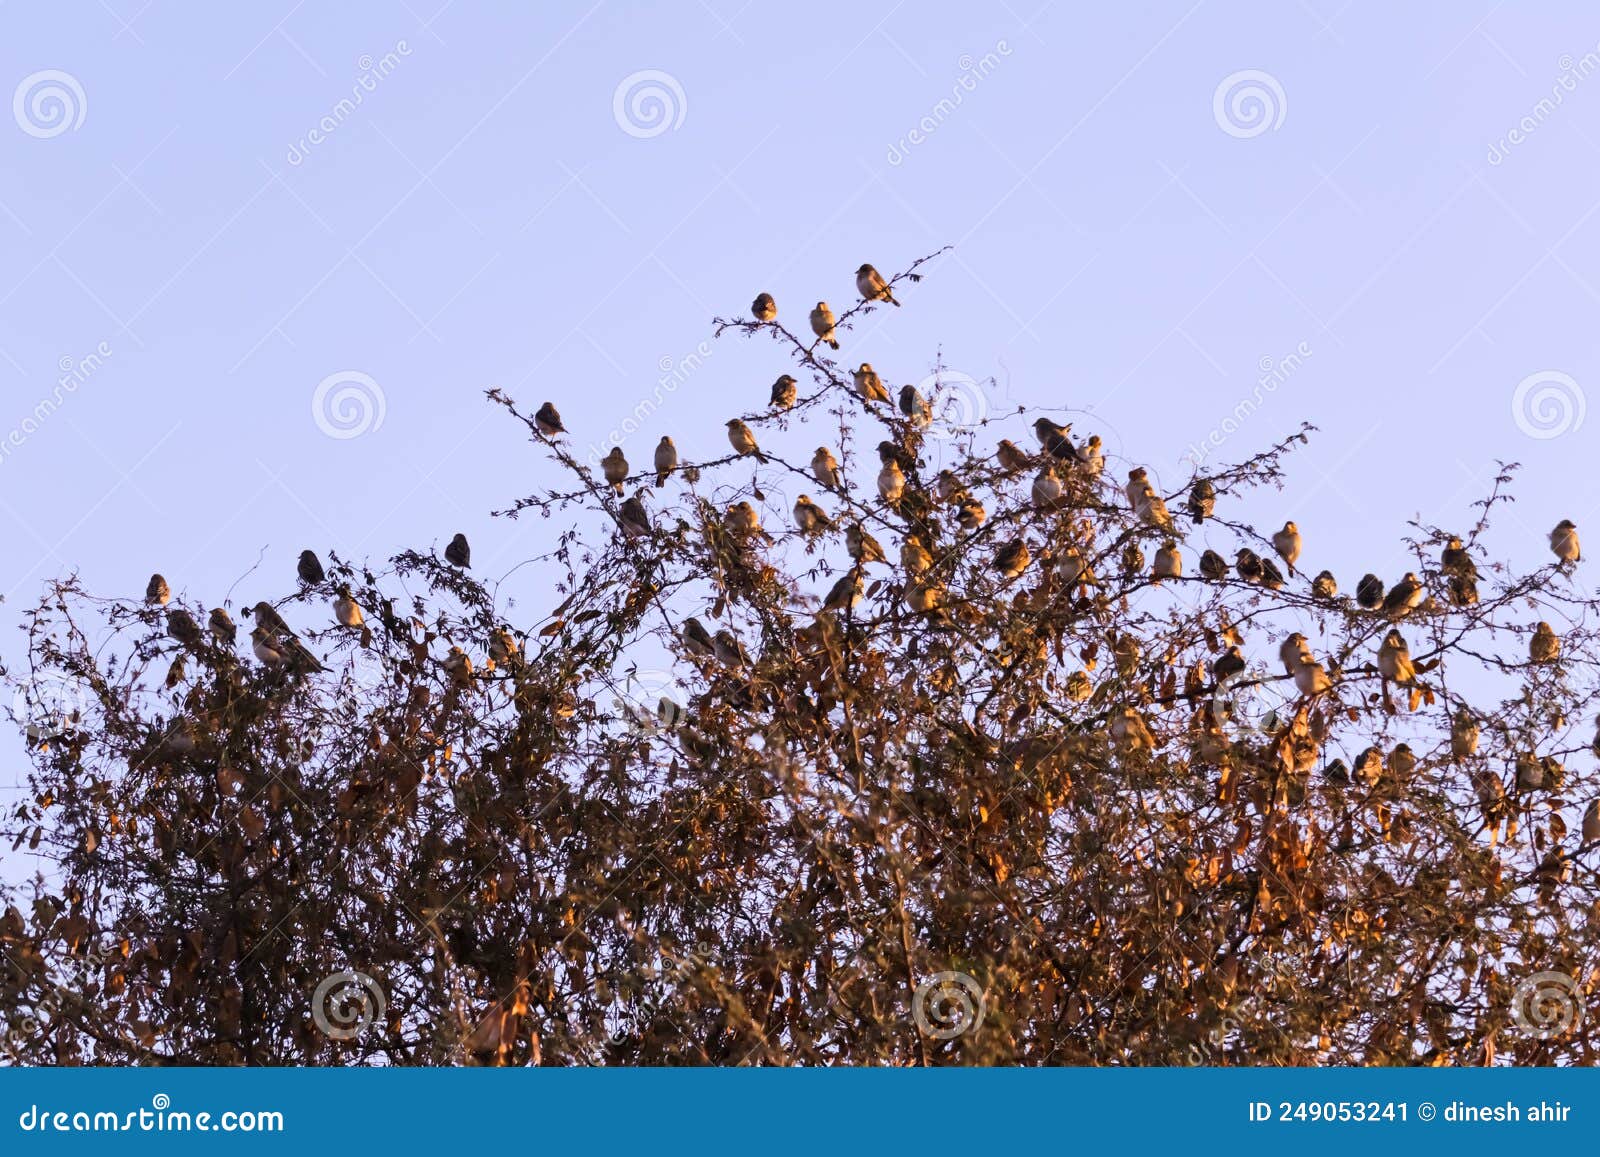 Sparrows on Tree,group of Small Birds Sitting in a Row on a Branch